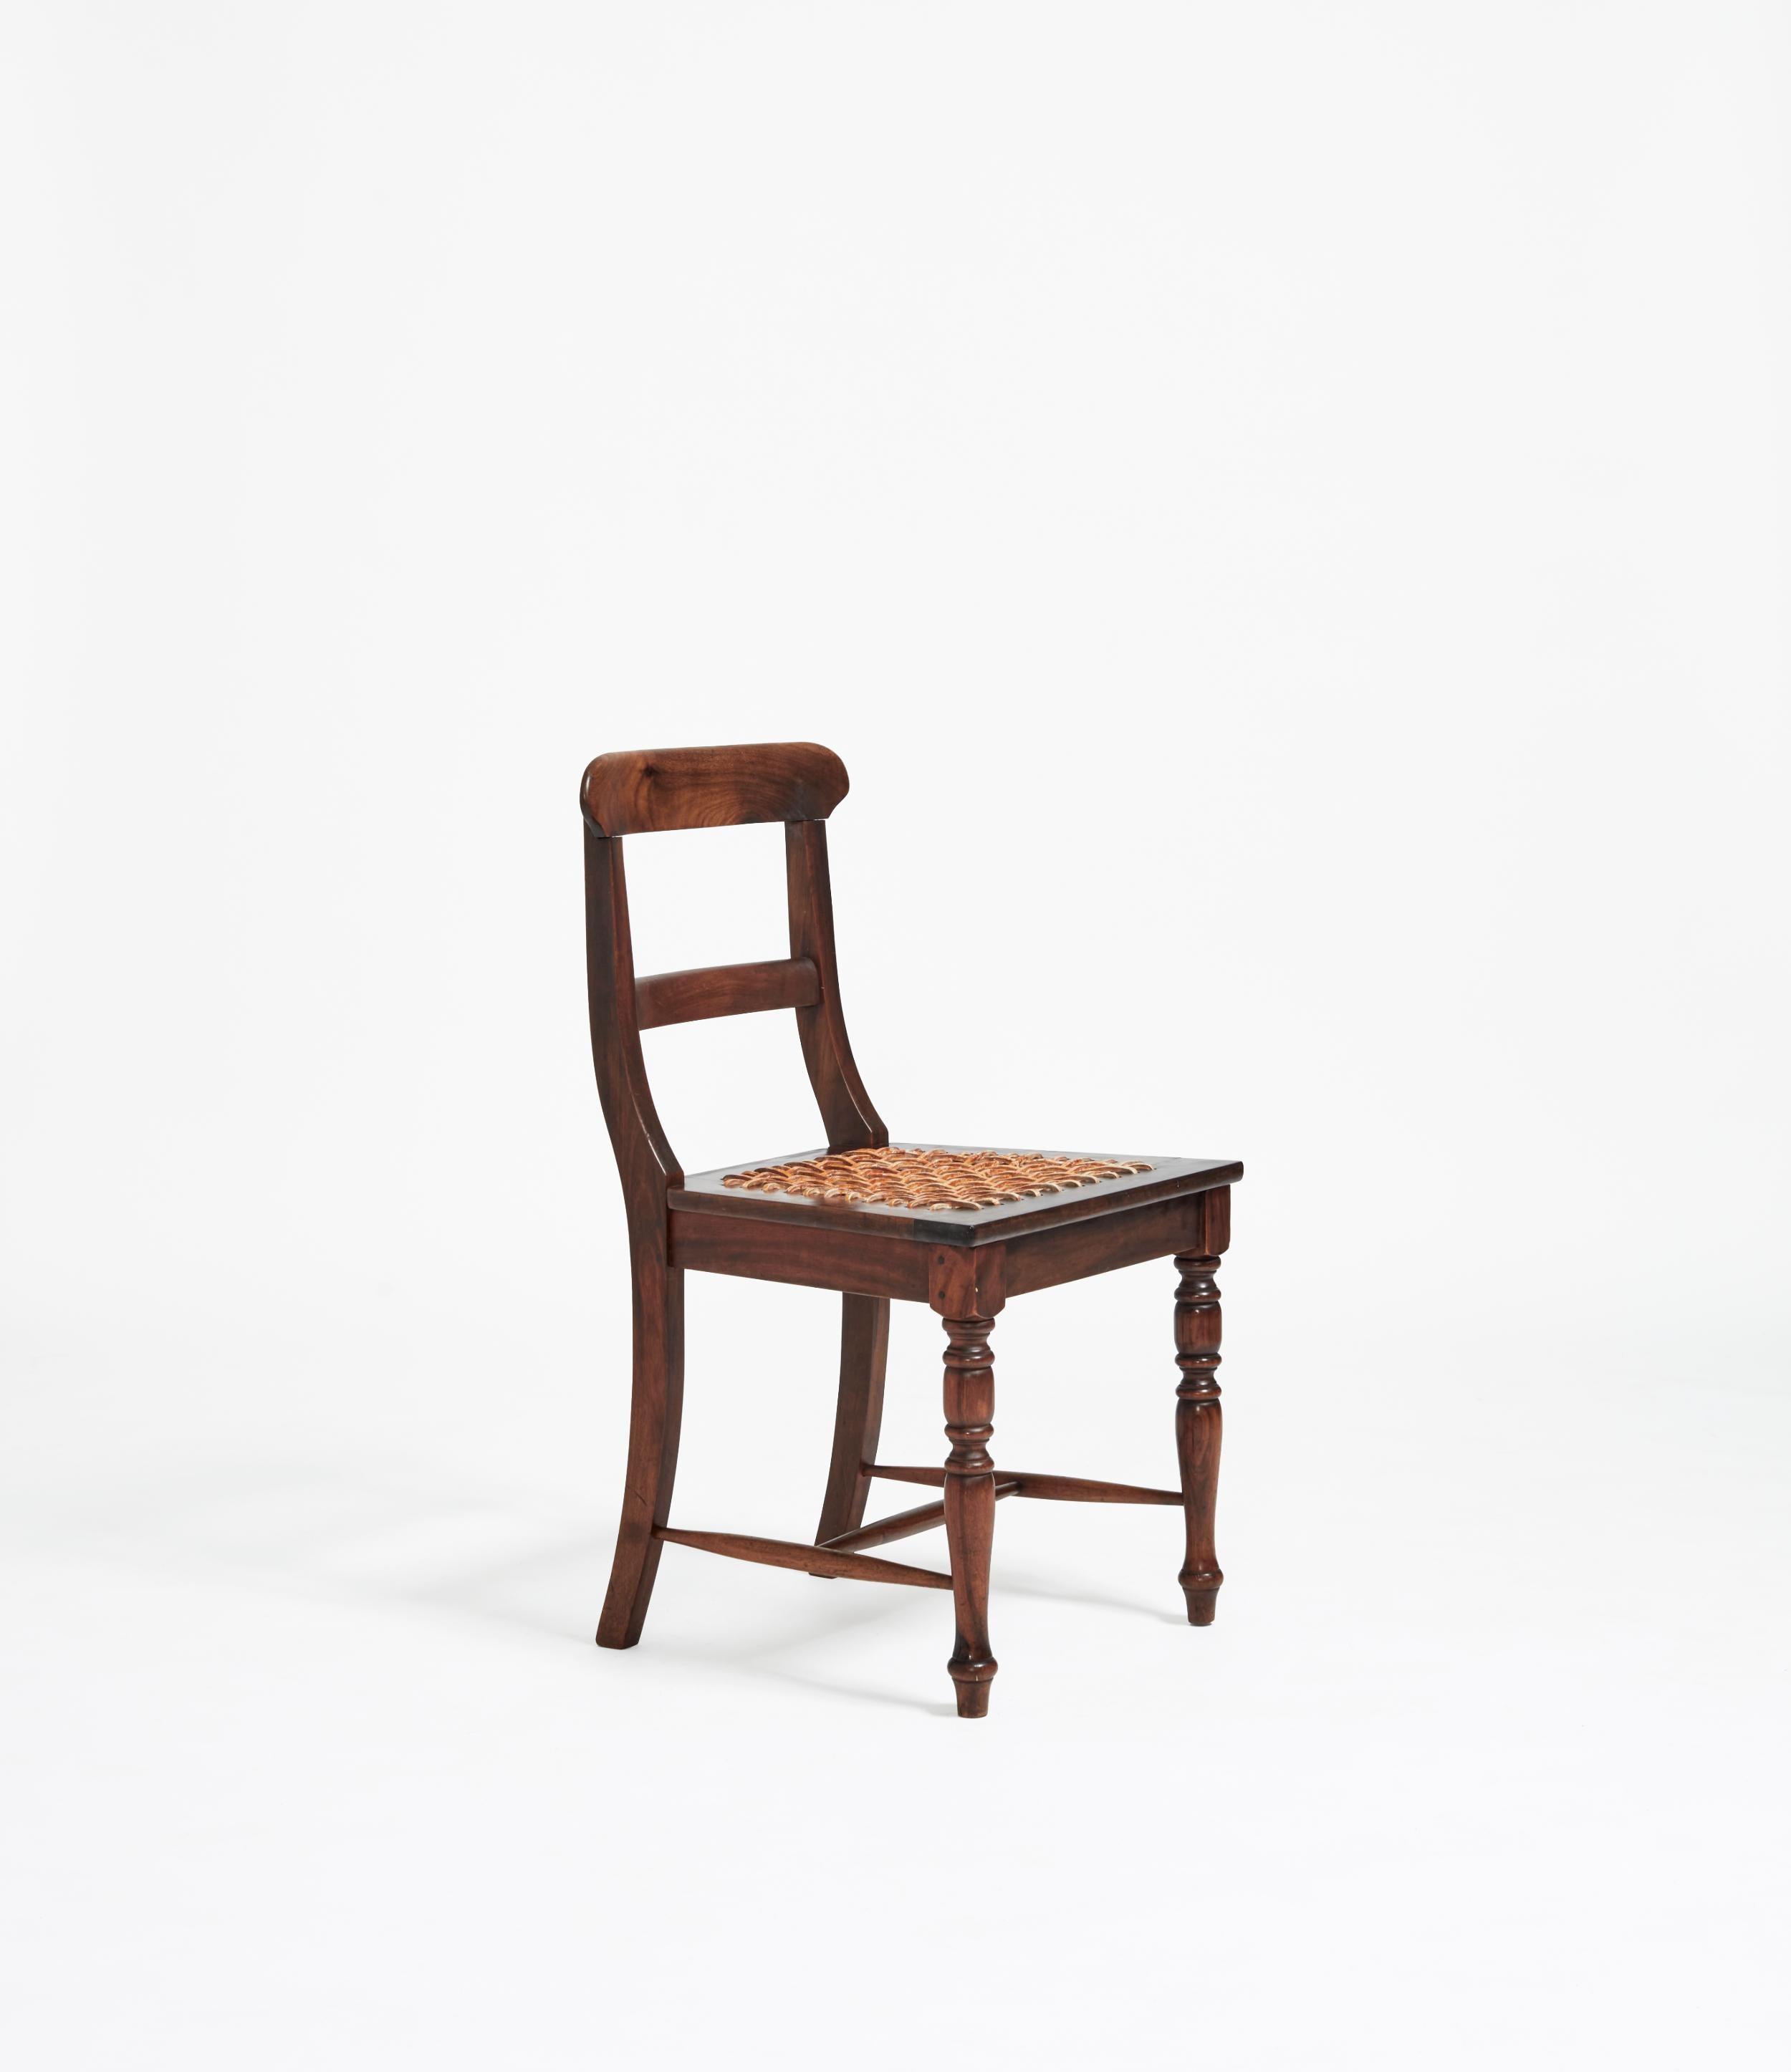 The “riempies” is a settler Dutch reference to leather thongs that are seen to be latticed as the seating for this chair. Threading the “riempies” through holes alongside the seat allow for it to be weaved with structural integrity; minimising